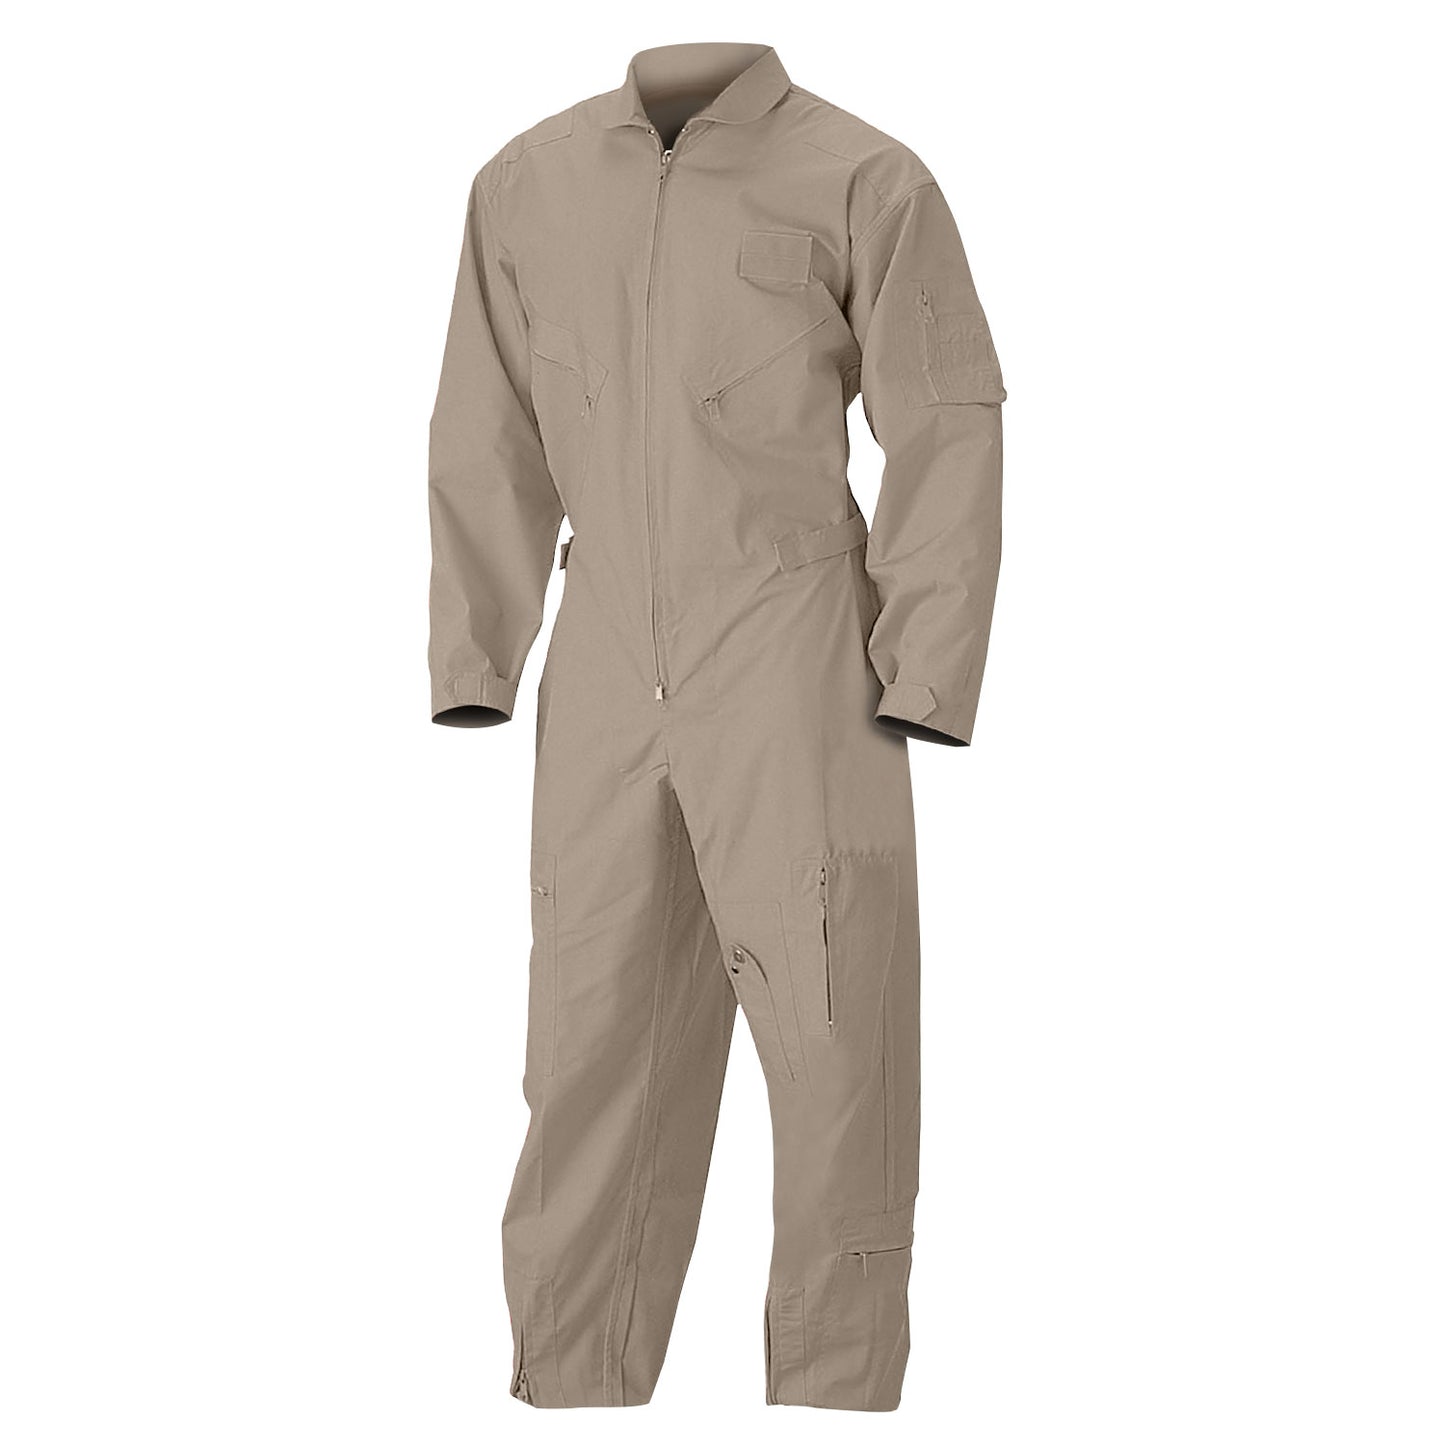 Air Force Style Flightsuit